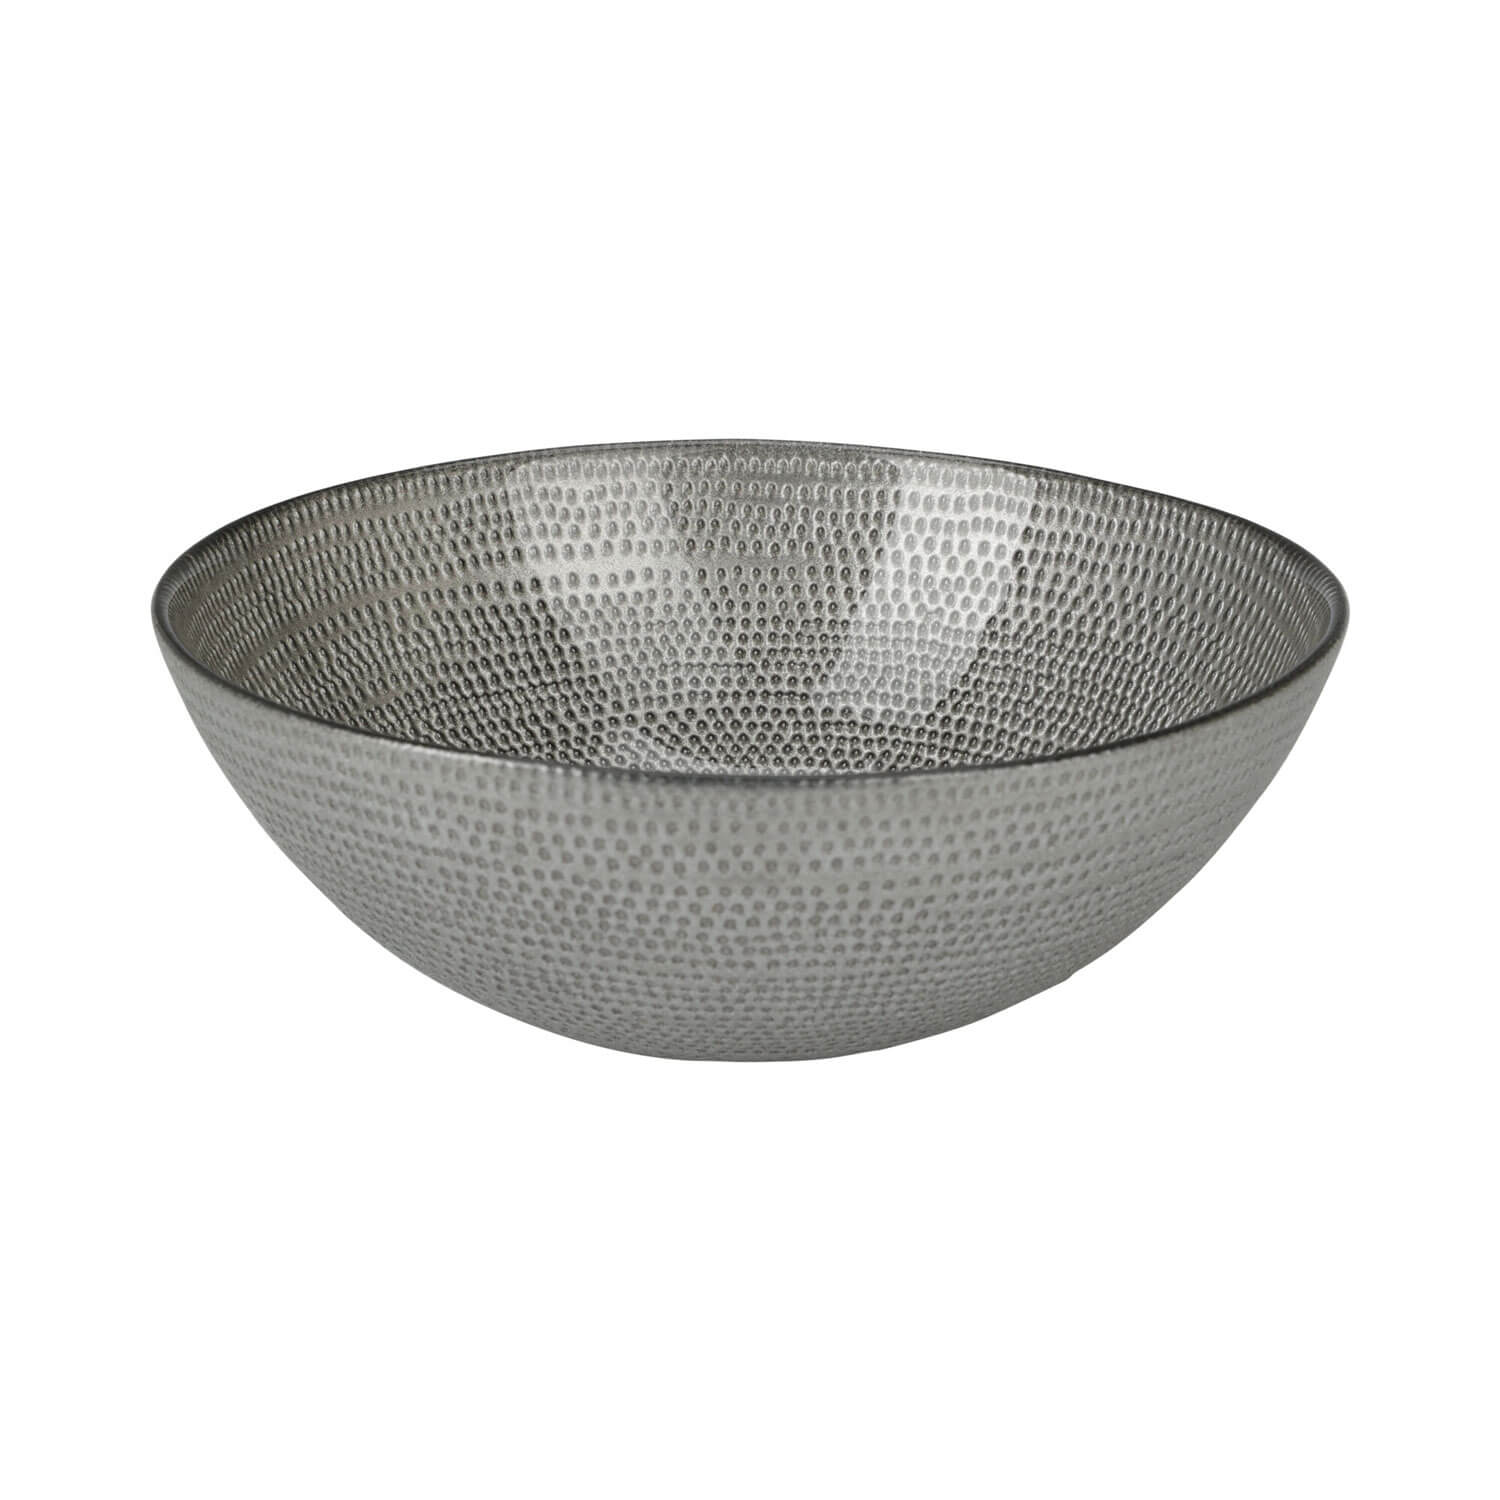 The Home Kitchen Glass Bowl - 15cm - Grey with Spots 1 Shaws Department Stores